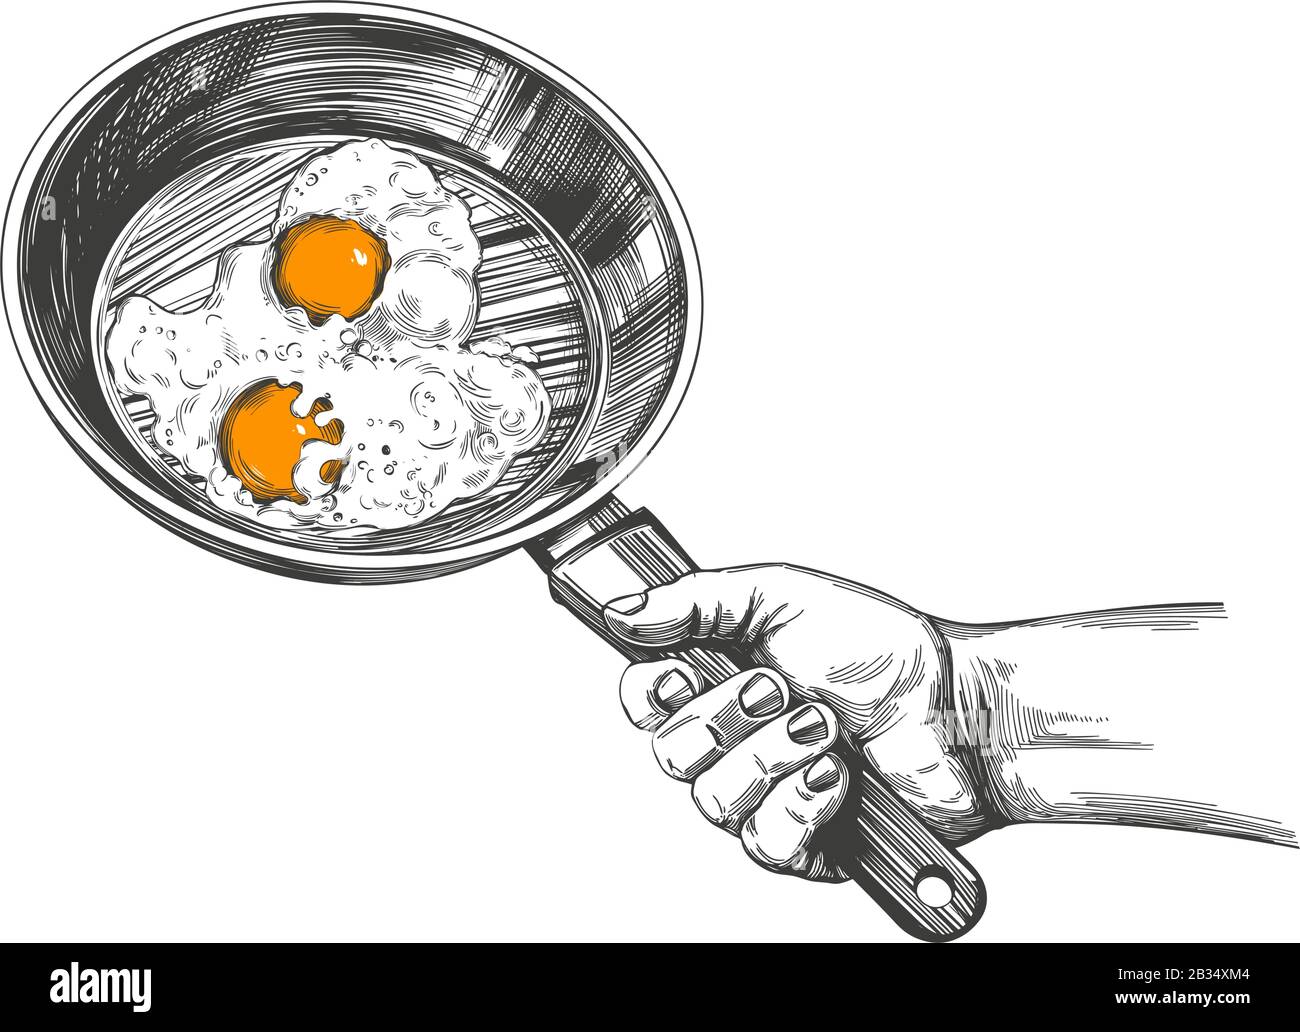 https://c8.alamy.com/comp/2B34XM4/fried-eggs-are-cooked-in-a-pan-hold-in-hand-cooking-kitchen-hand-drawn-vector-illustration-realistic-sketch-2B34XM4.jpg